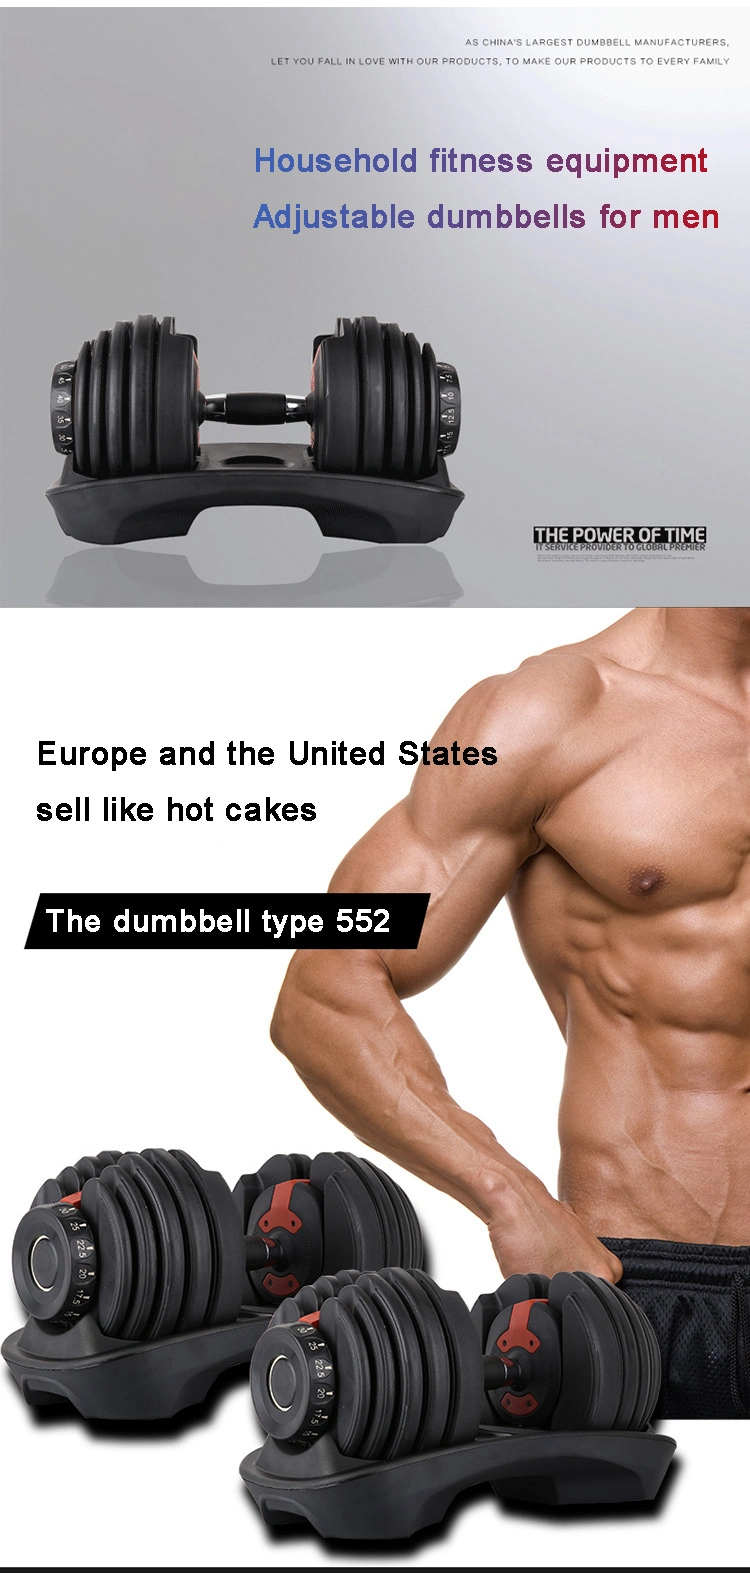 New Weight Lifting 24kg 40kg Gym Box Packing Adjustable Other Fitness Accessories Gym Equipment Dumbbell Set